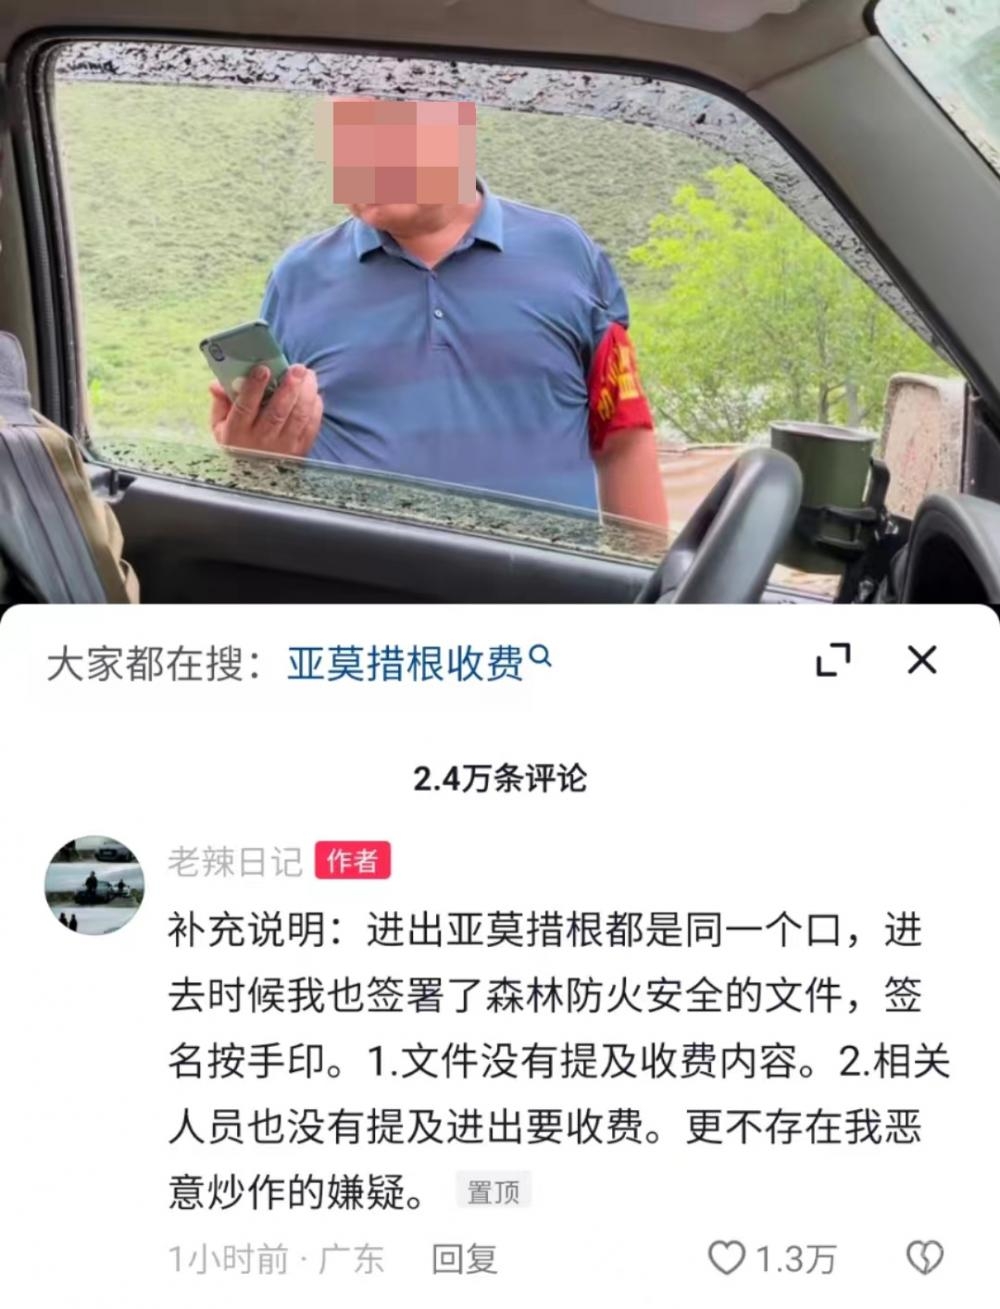 Tourism Bureau of Batang County, Garze: A meeting is currently underway to discuss and handle the issue. A tourism blogger was stopped by a fire safety supervisor and charged 200 yuan